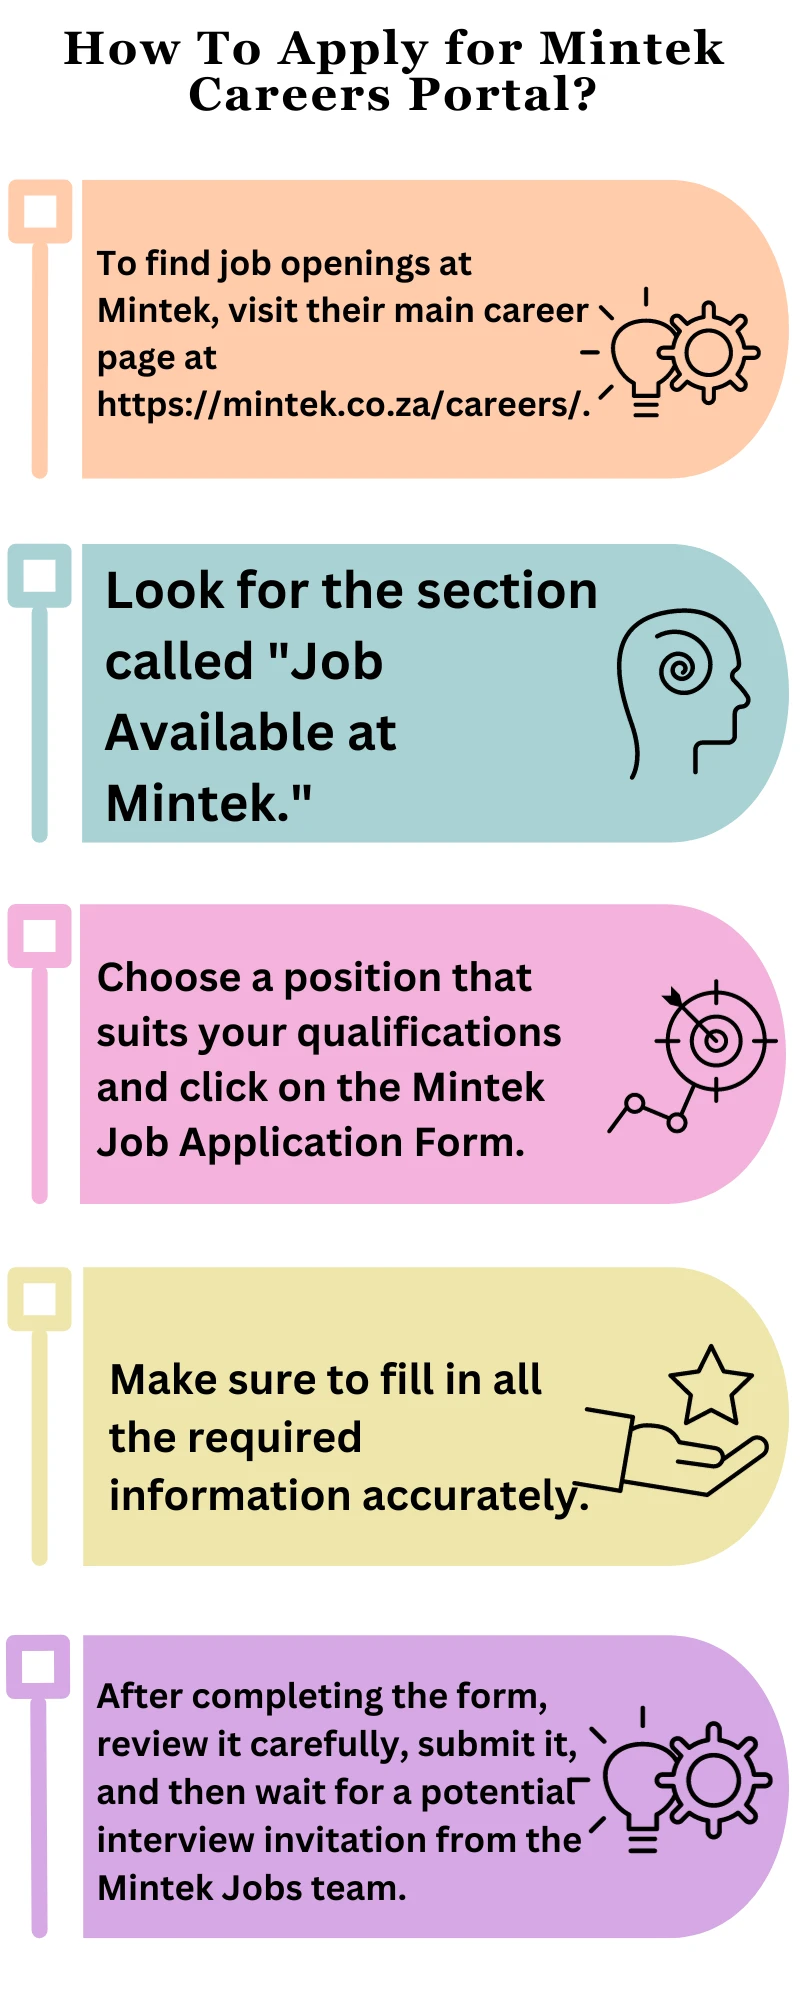 How To Apply for Mintek Careers Portal?